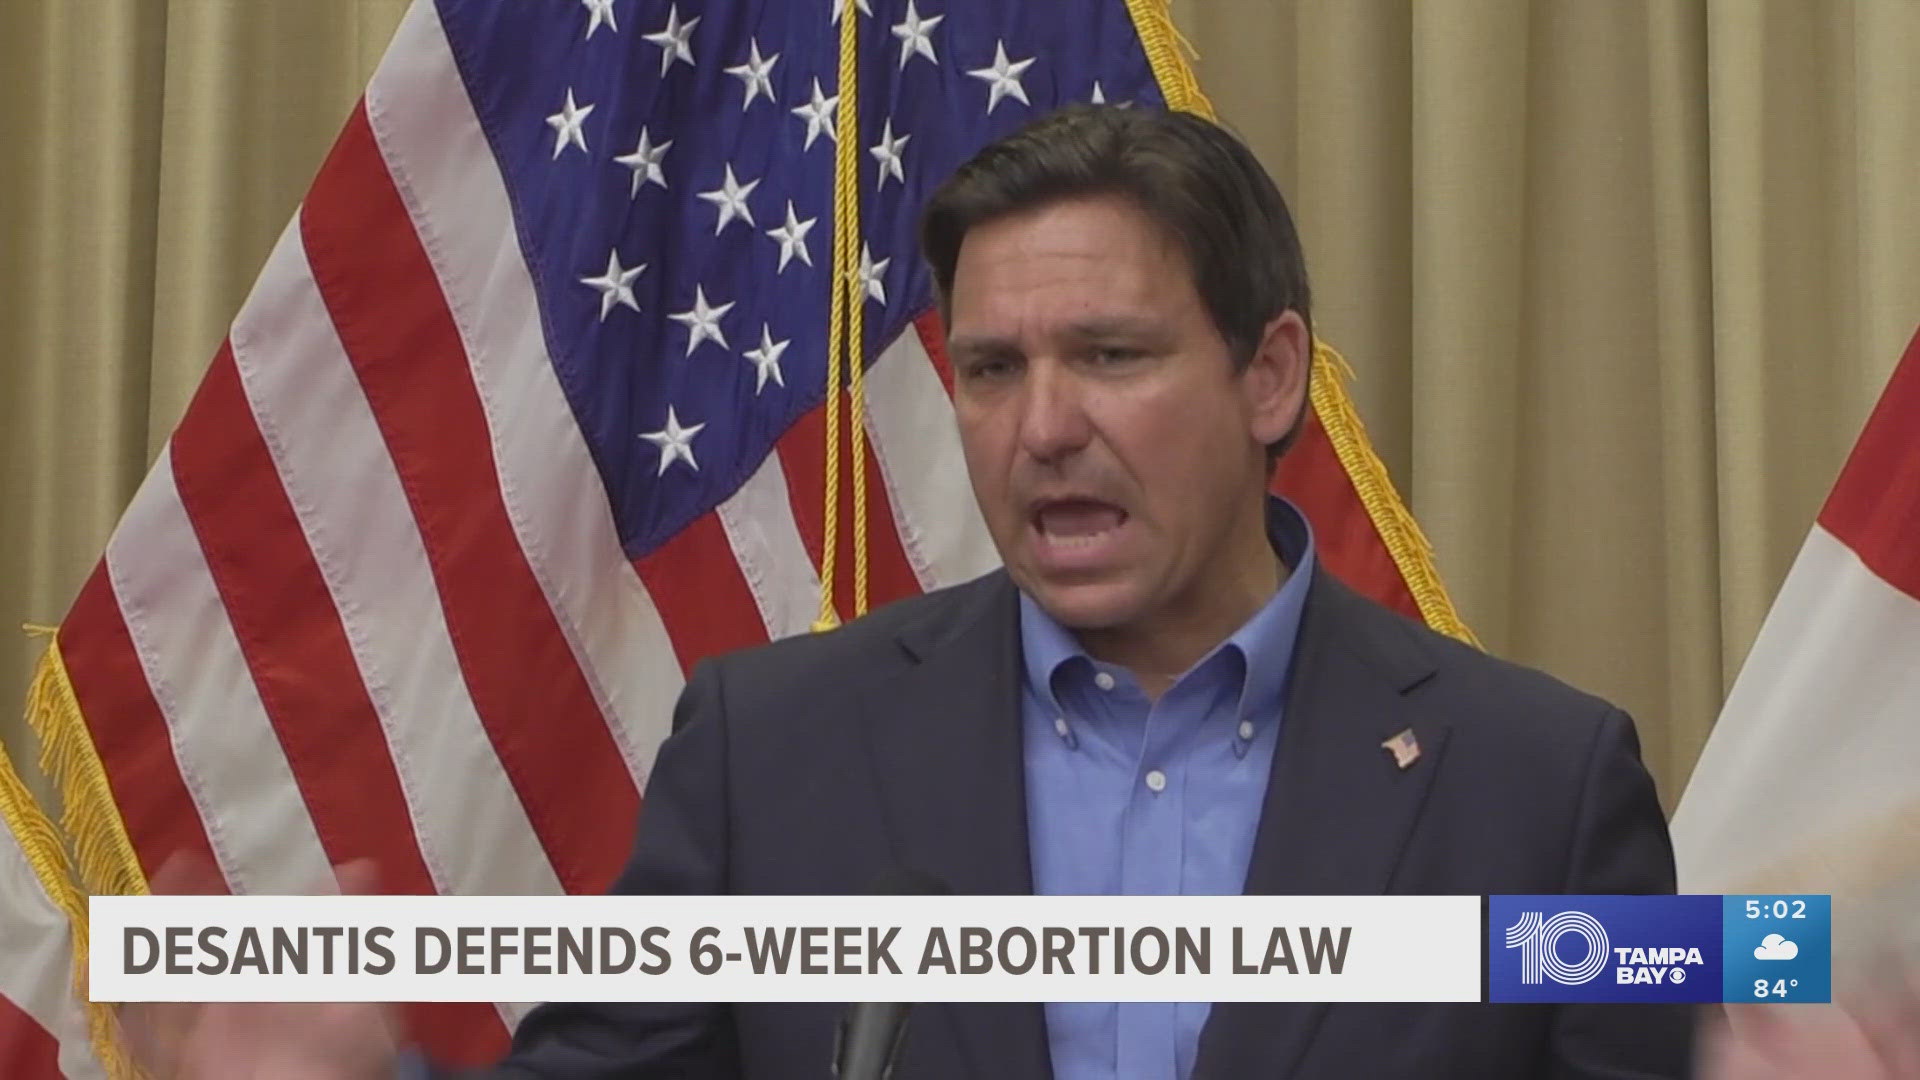 DeSantis said he agrees with the Supreme Court providing protections for a baby that has a detectable heartbeat.